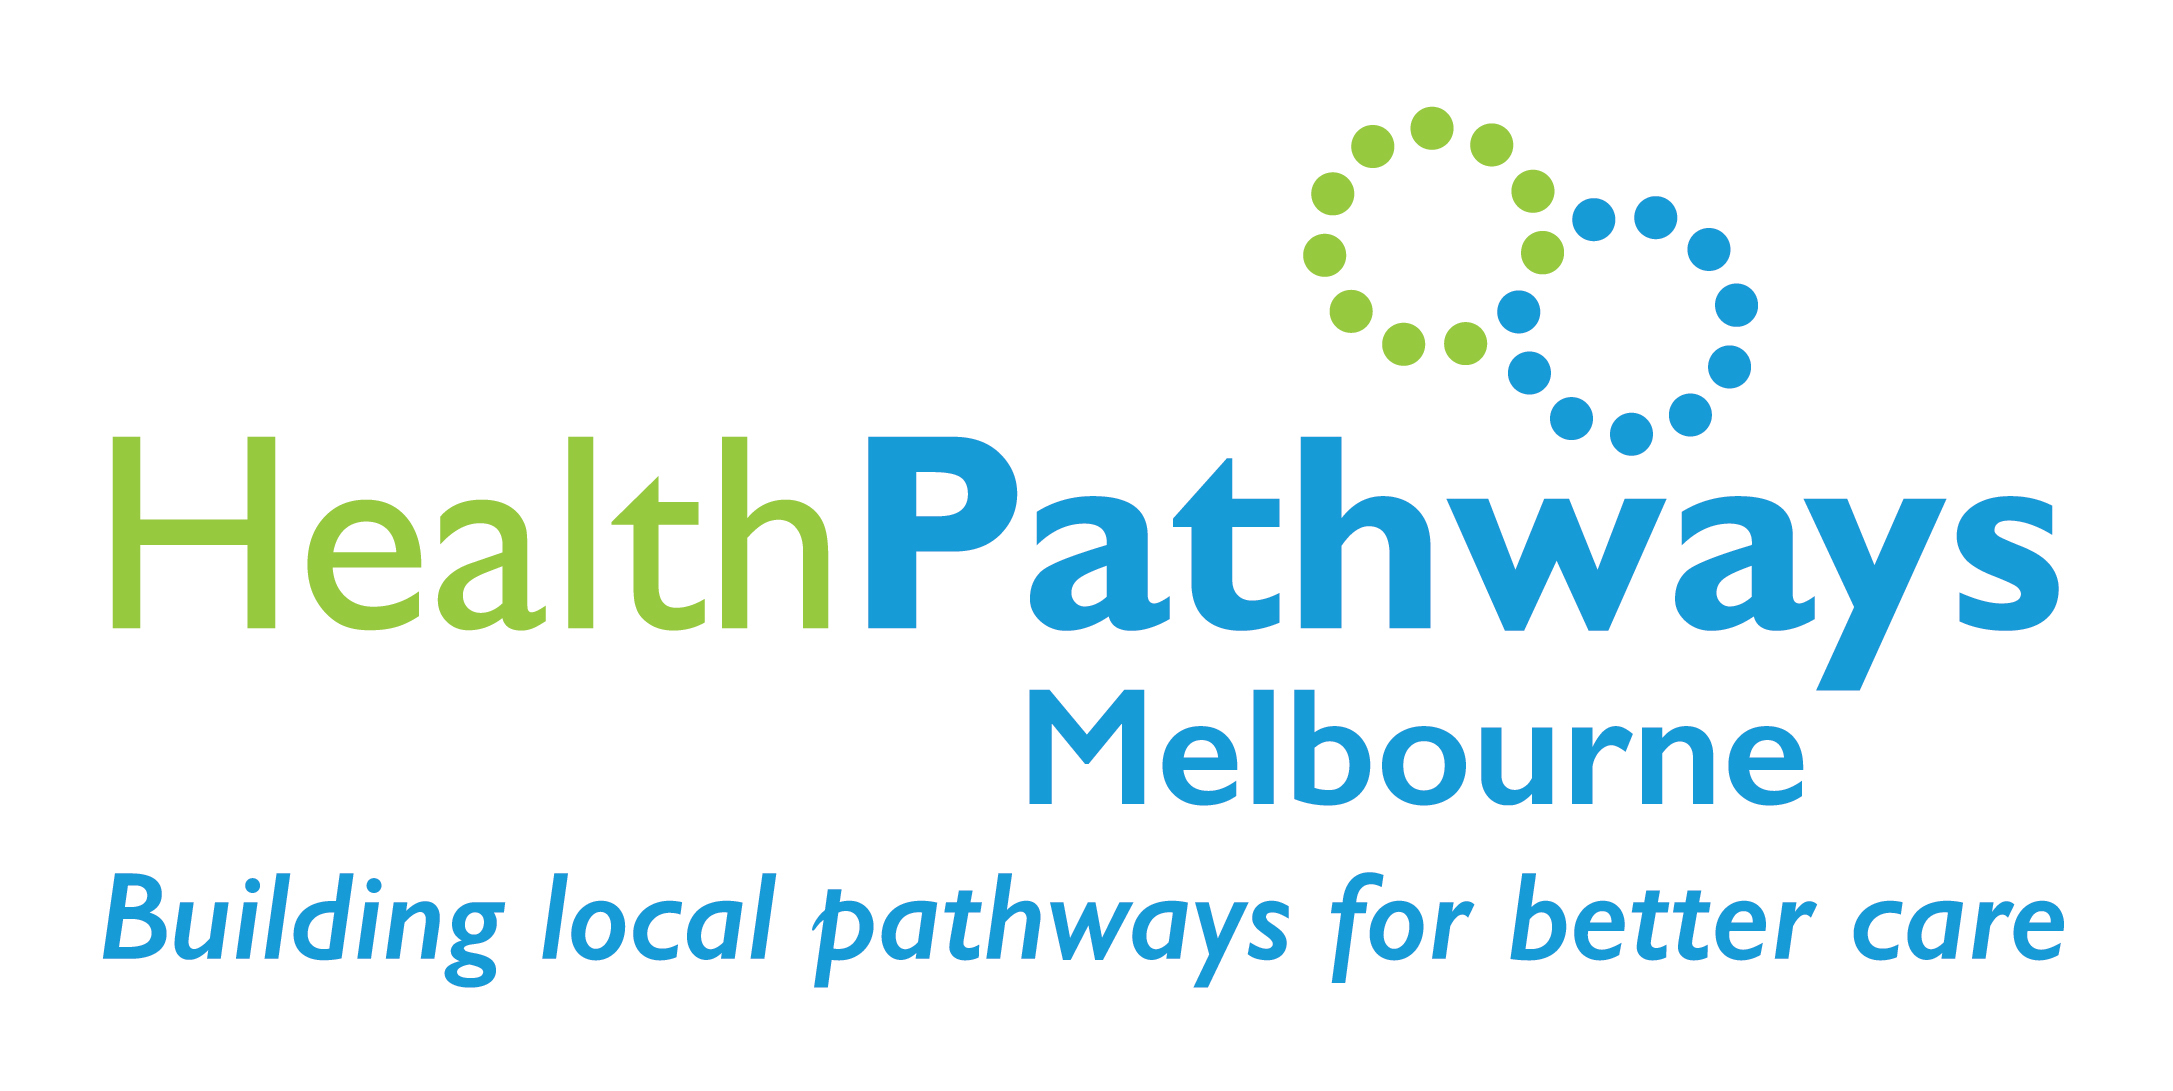 HealthPathways Melbourne launches mental health resources 